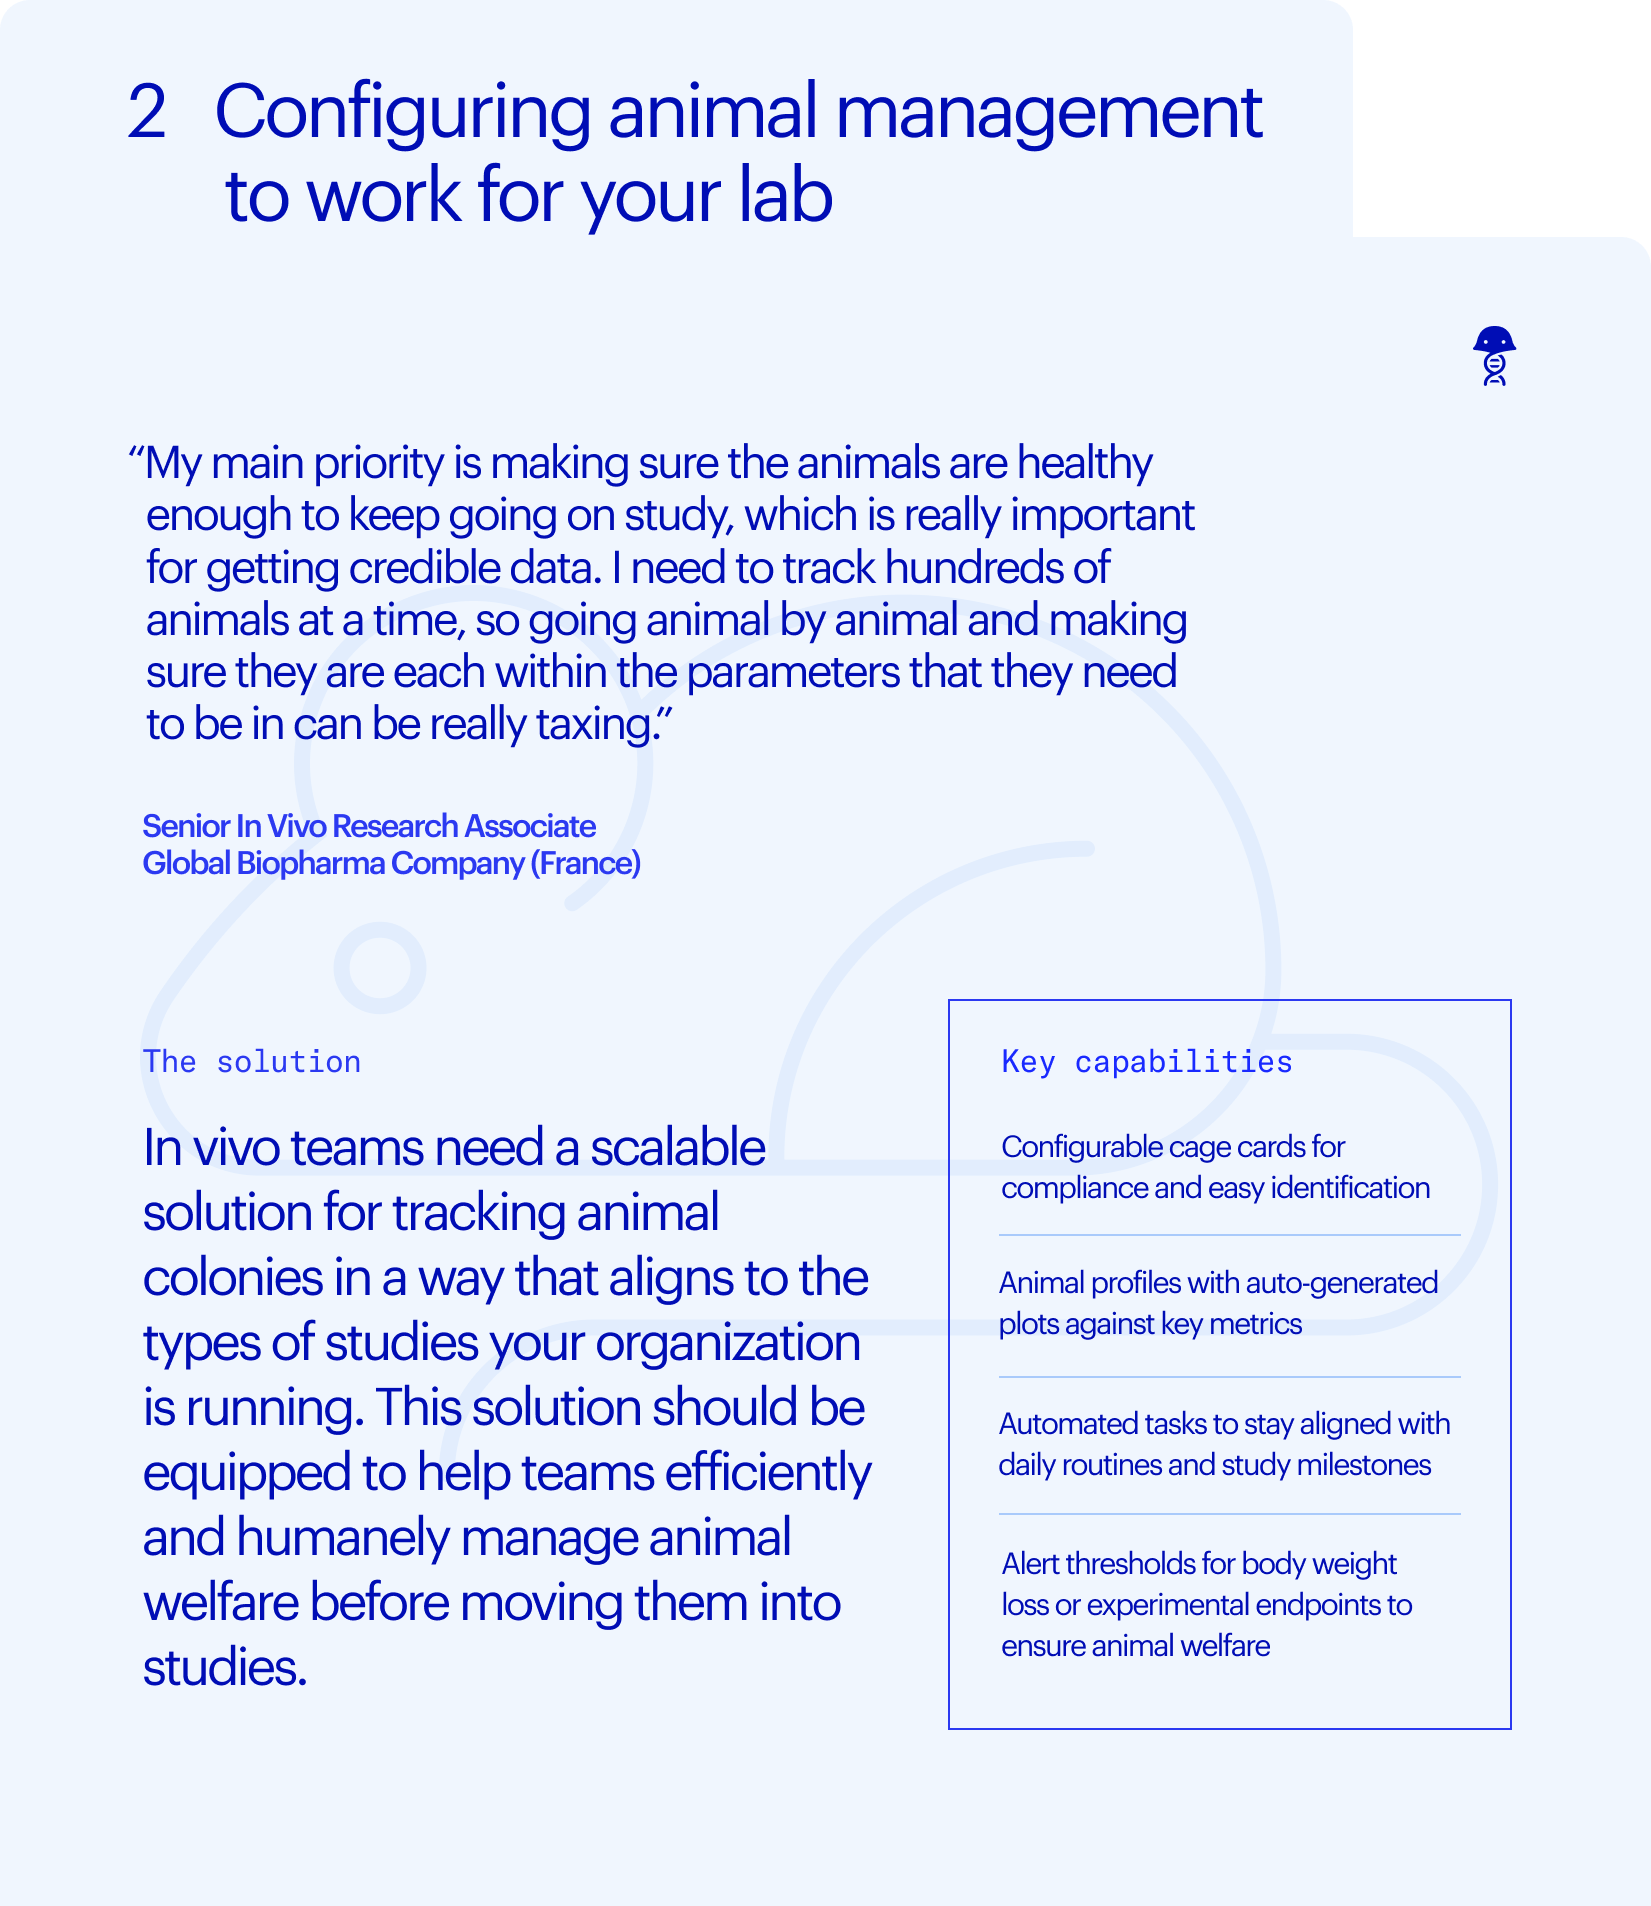 studies-infographic-2-configuring-animal-management-to-work-for-your-lab